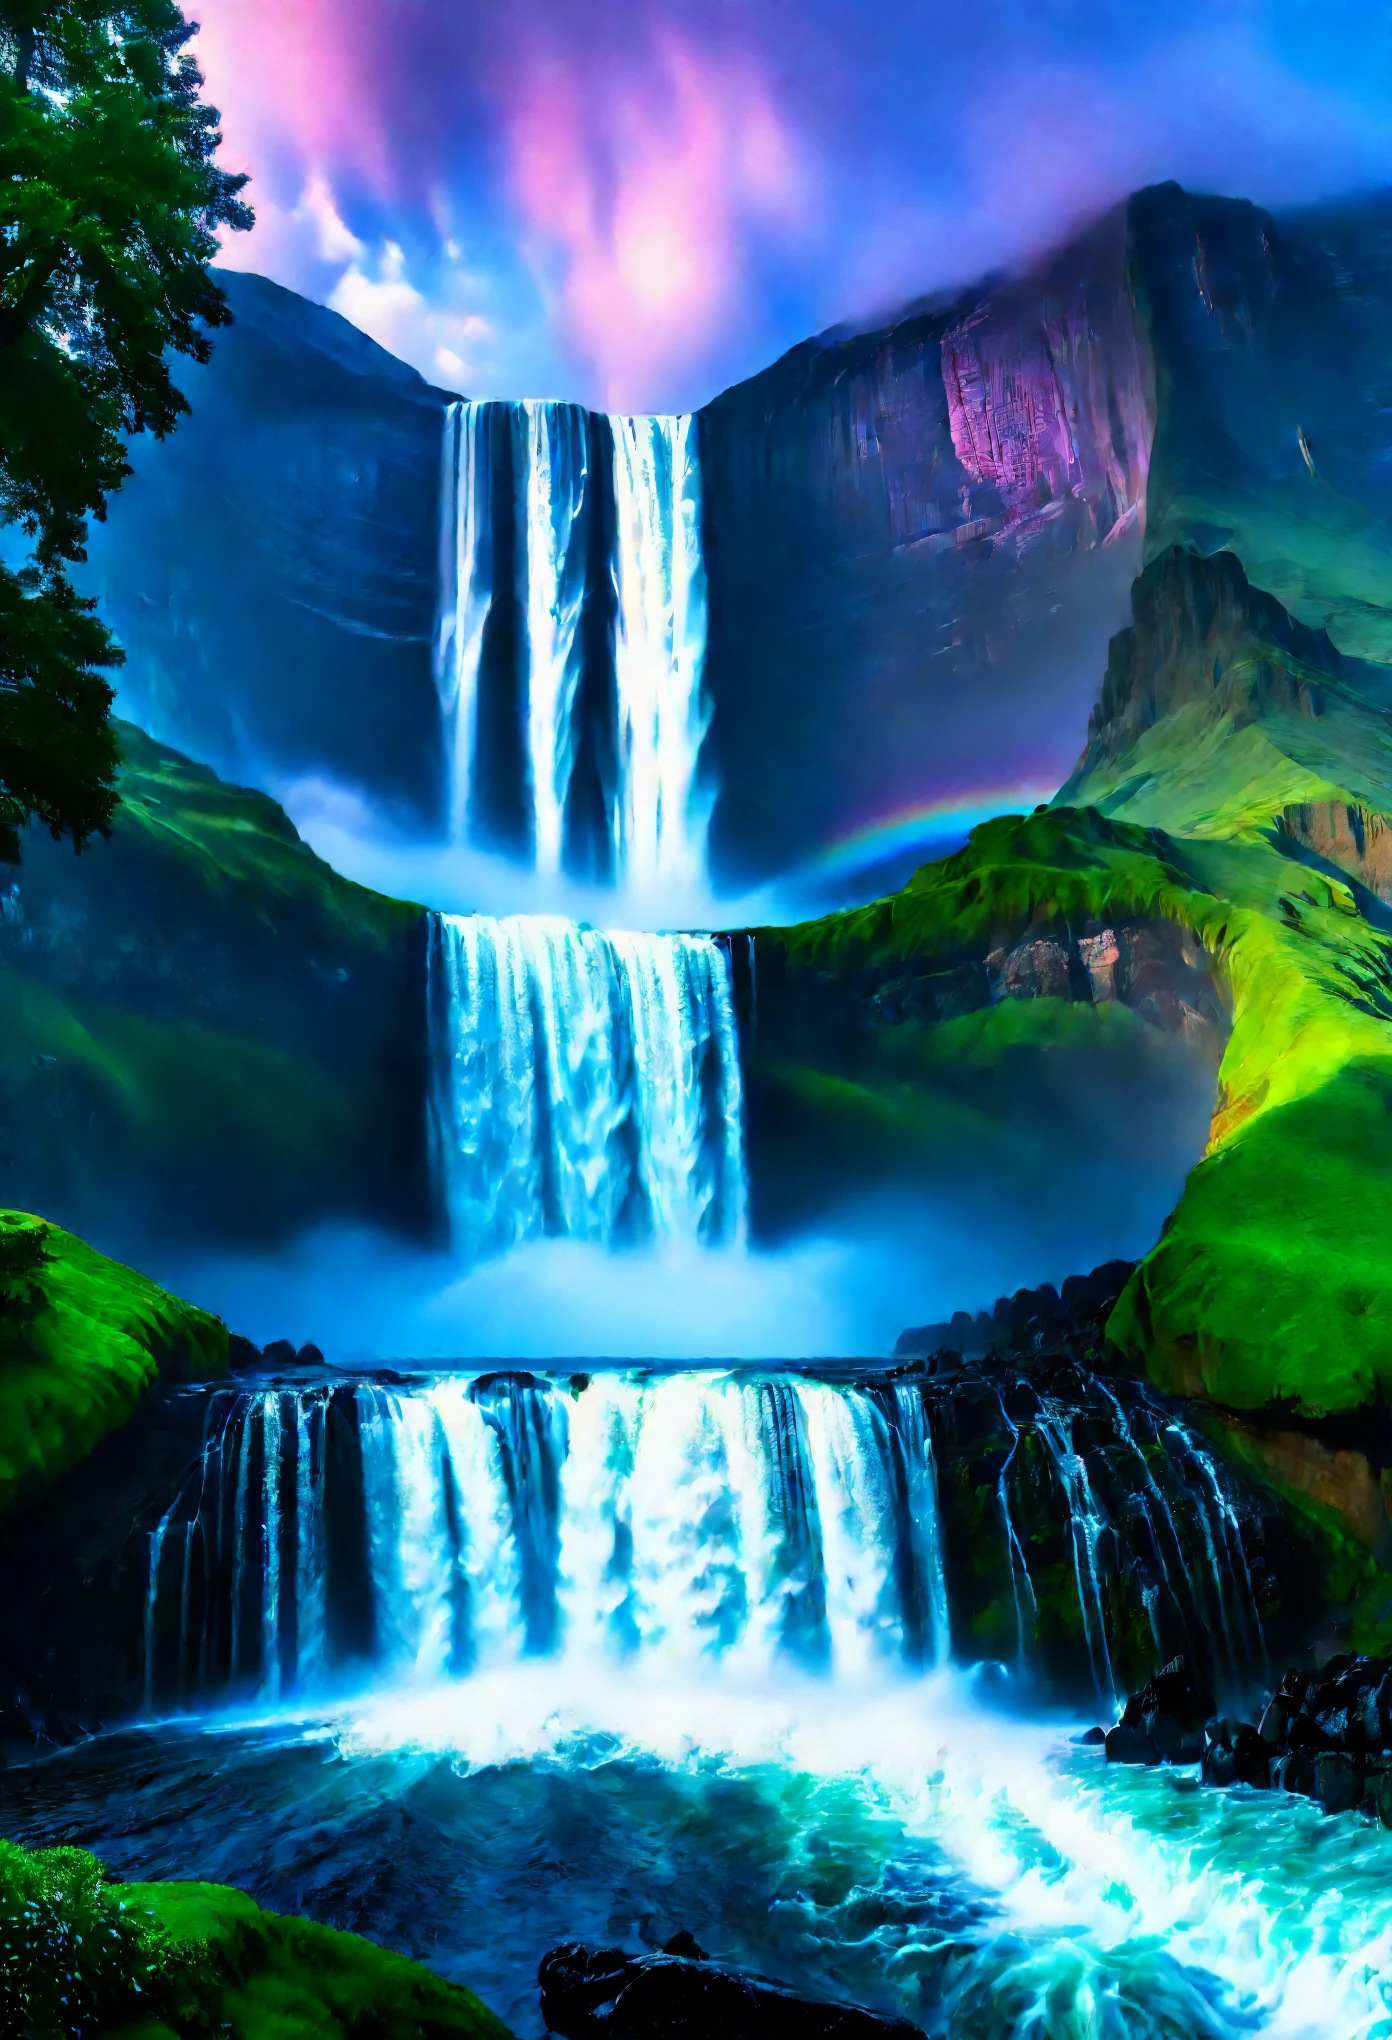 "(best quality, 4k, 8k, highres, masterpiece:1.2), ultra-detailed, (realistic, photorealistic, photo-realistic:1.37), monumental waterfall, oil painting, dramatic, powerful, roaring, cascading, thunderous, mountains collapsing, seas pouring out, awe-inspiring, dynamic, shimmering rainbows, mist, spray of water droplets, rocks and boulders, lush vegetation, HDR, studio lighting, vibrant colors, warm and cool tones, interplay between light and shadow."